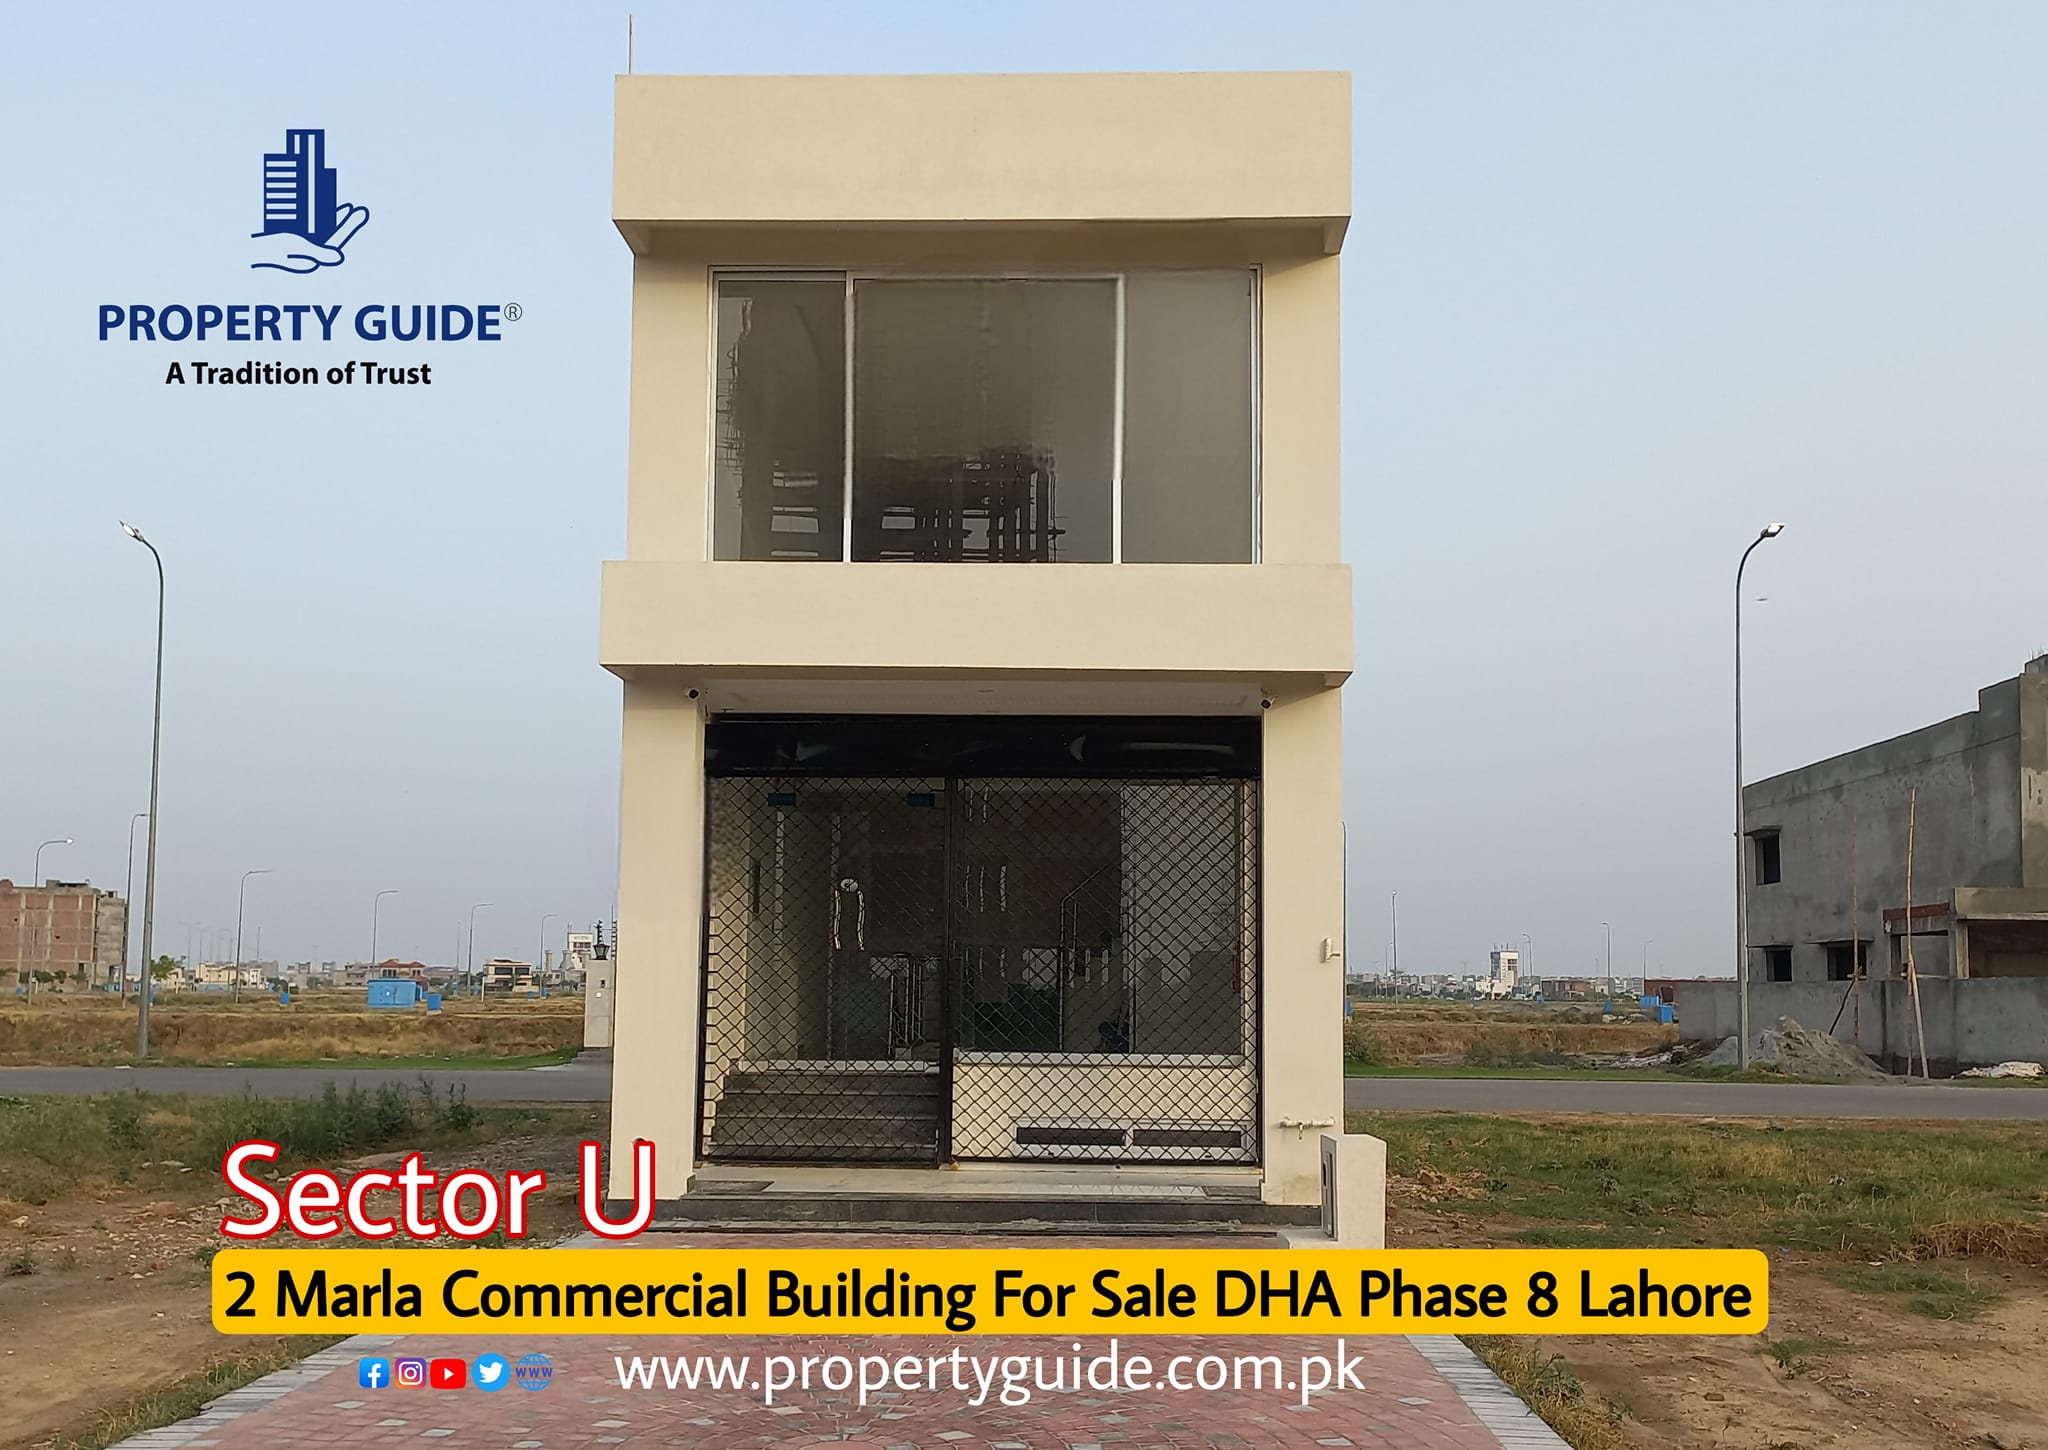 2 Marla Commercial Building For Sale DHA Phase 8 Lahore